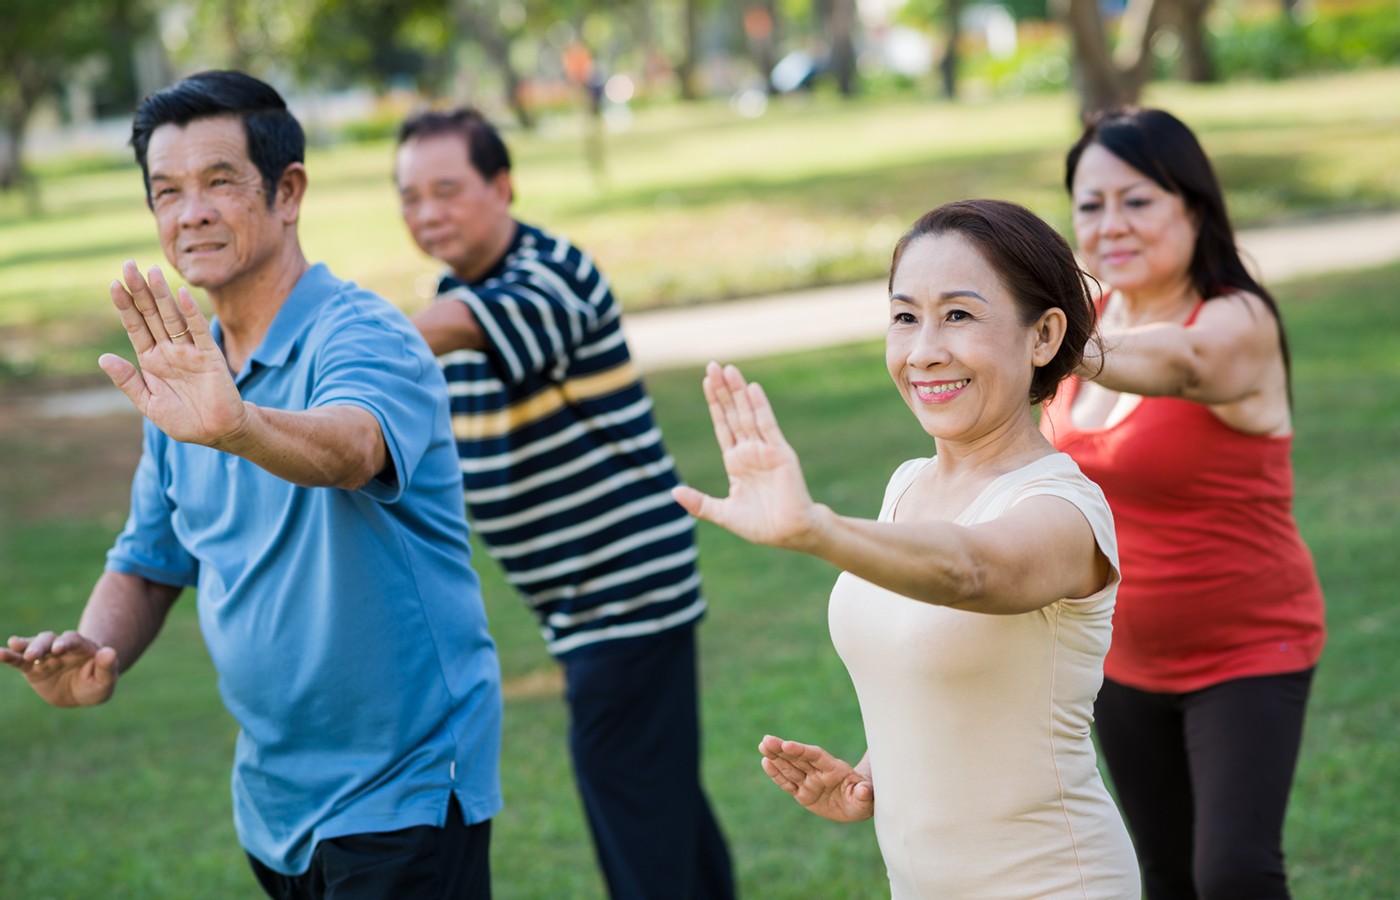 Tai Chi More Effective Than Aerobic Exercise for Prehypertension: Study